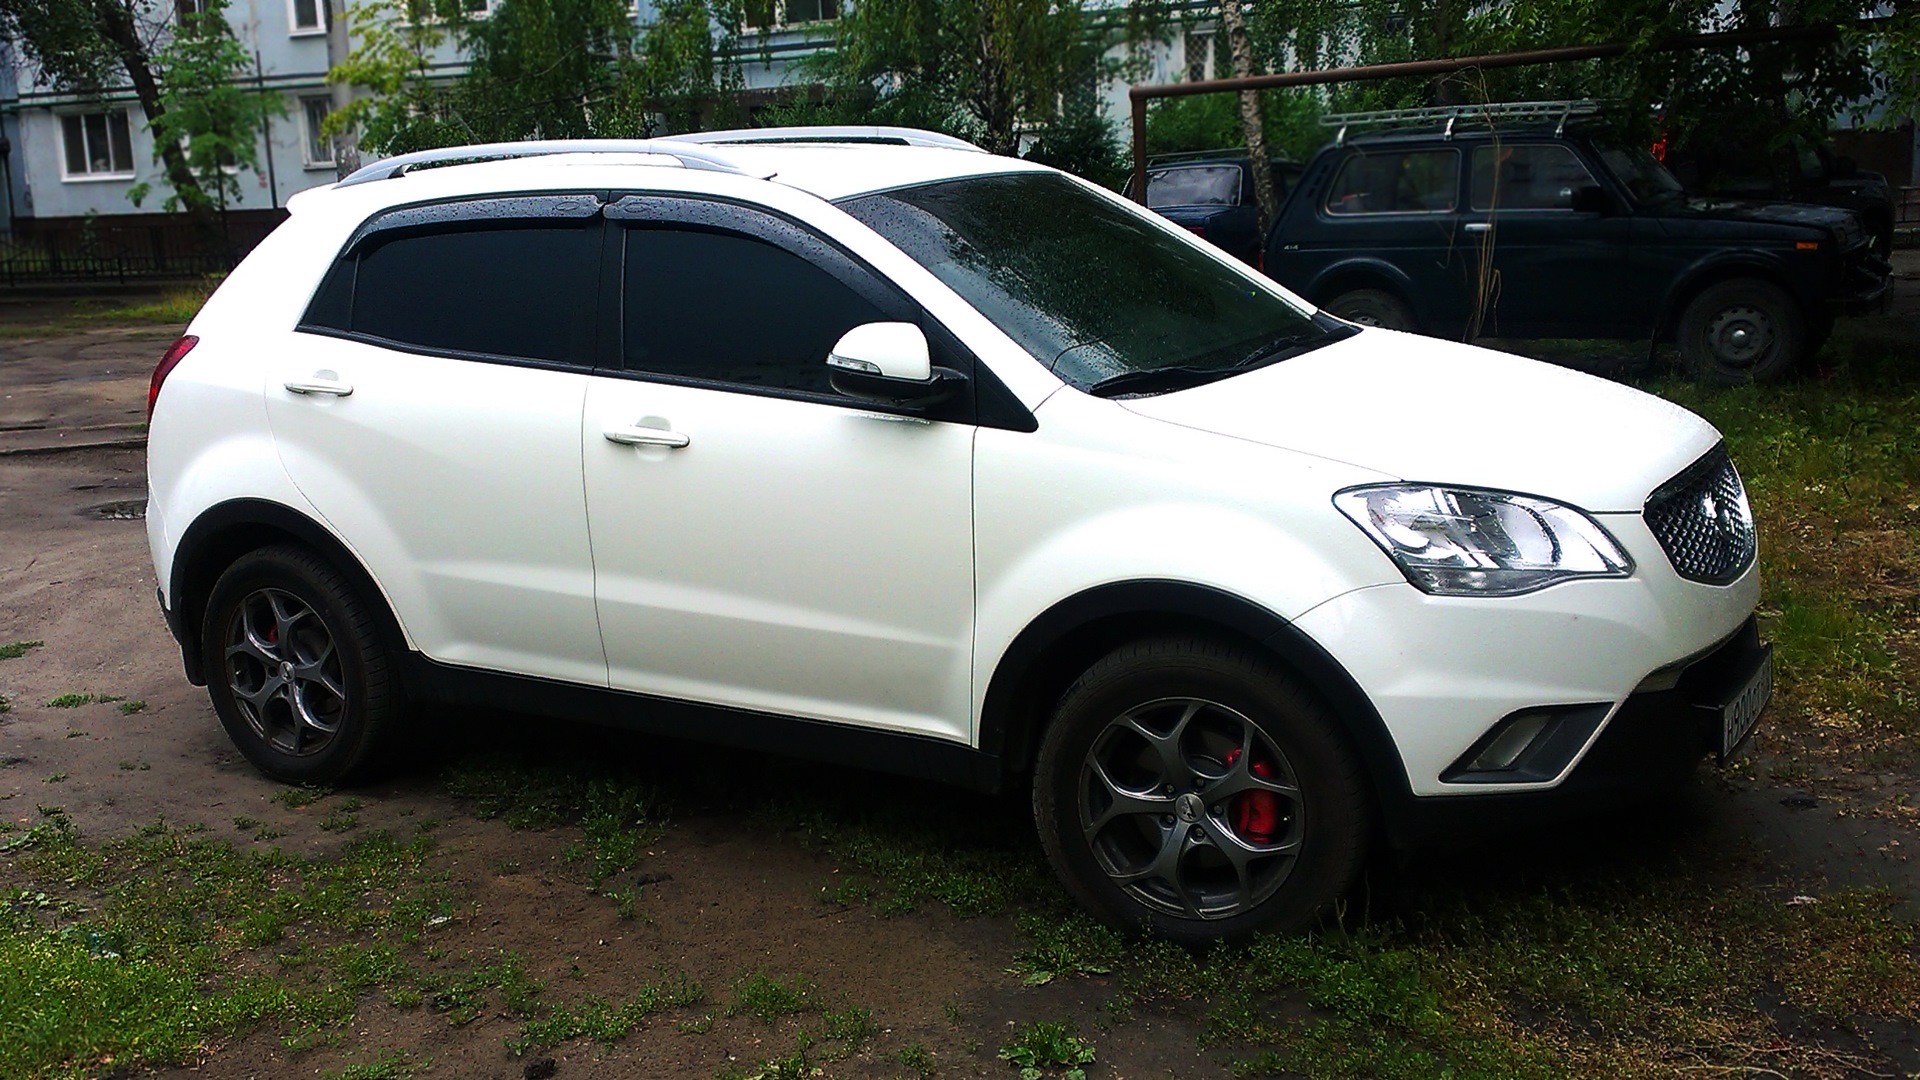 Диски new actyon. SSANGYONG Actyon 2011. Санг Йонг Актион 2011. SSANGYONG Actyon 2012. SSANGYONG Actyon New 2011.